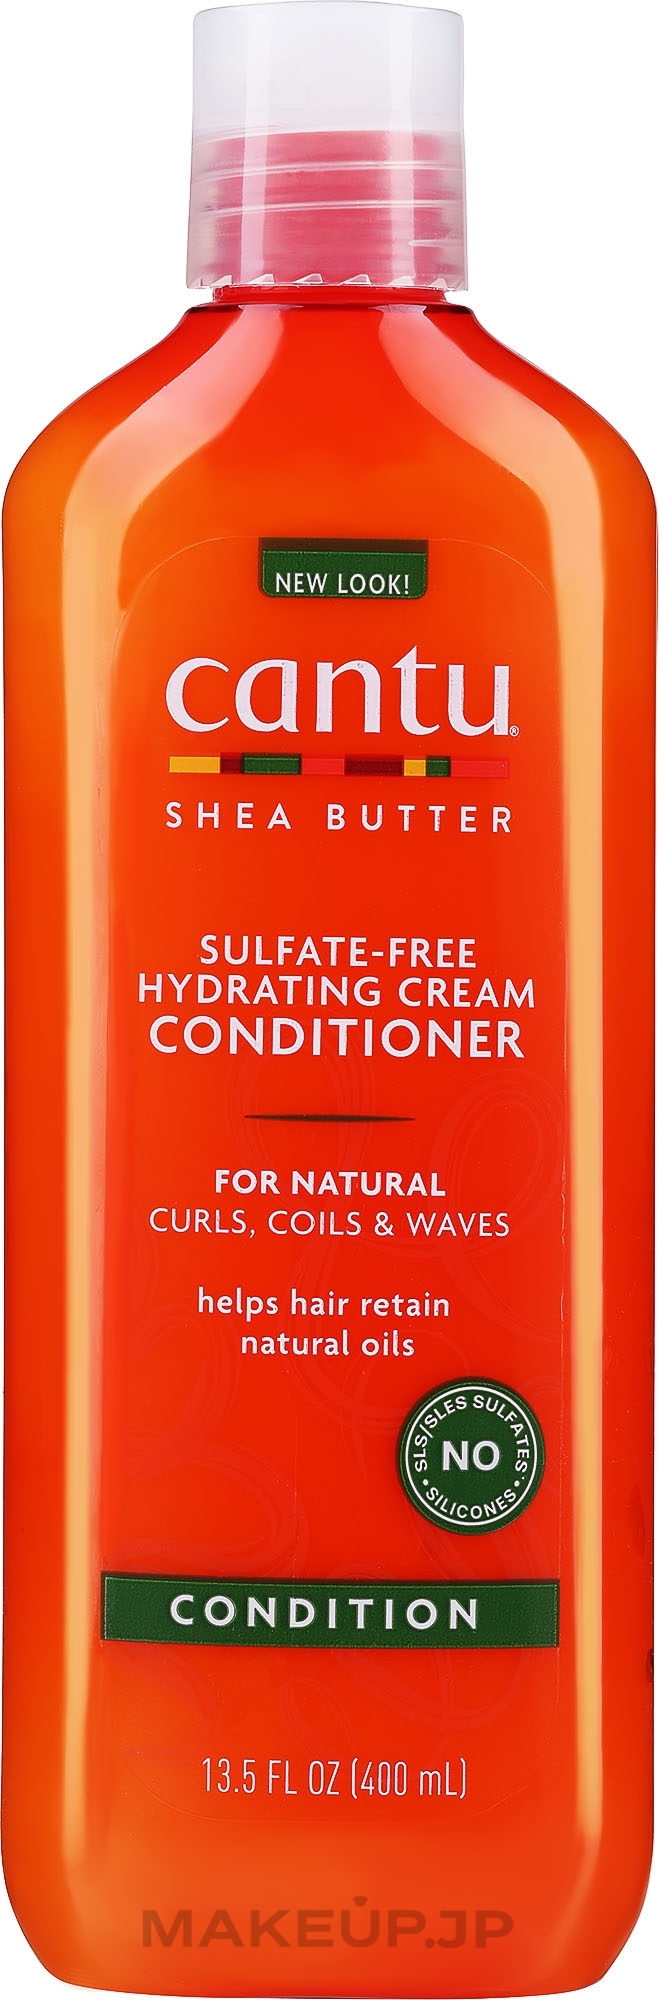 Softening Conditioner - Cantu Shea Butter Sulfate-Free Hydrating Cream Conditioner — photo 400 ml